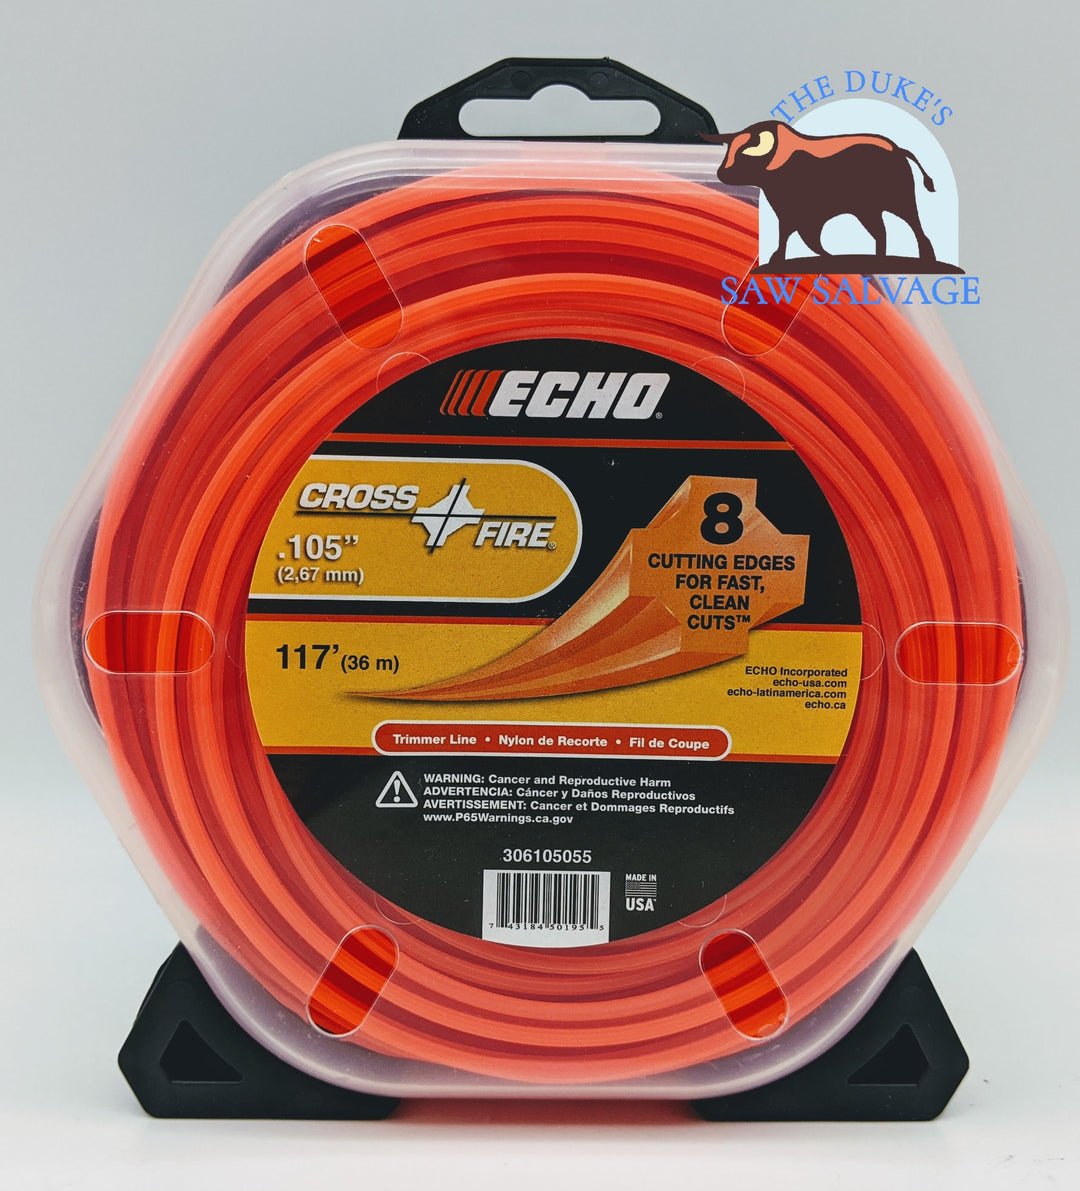 GENUINE ECHO CROSSFIRE TRIMMER LINE .105 1/2 LB PACKAGE - www.SawSalvage.co Traverse Creek Inc.